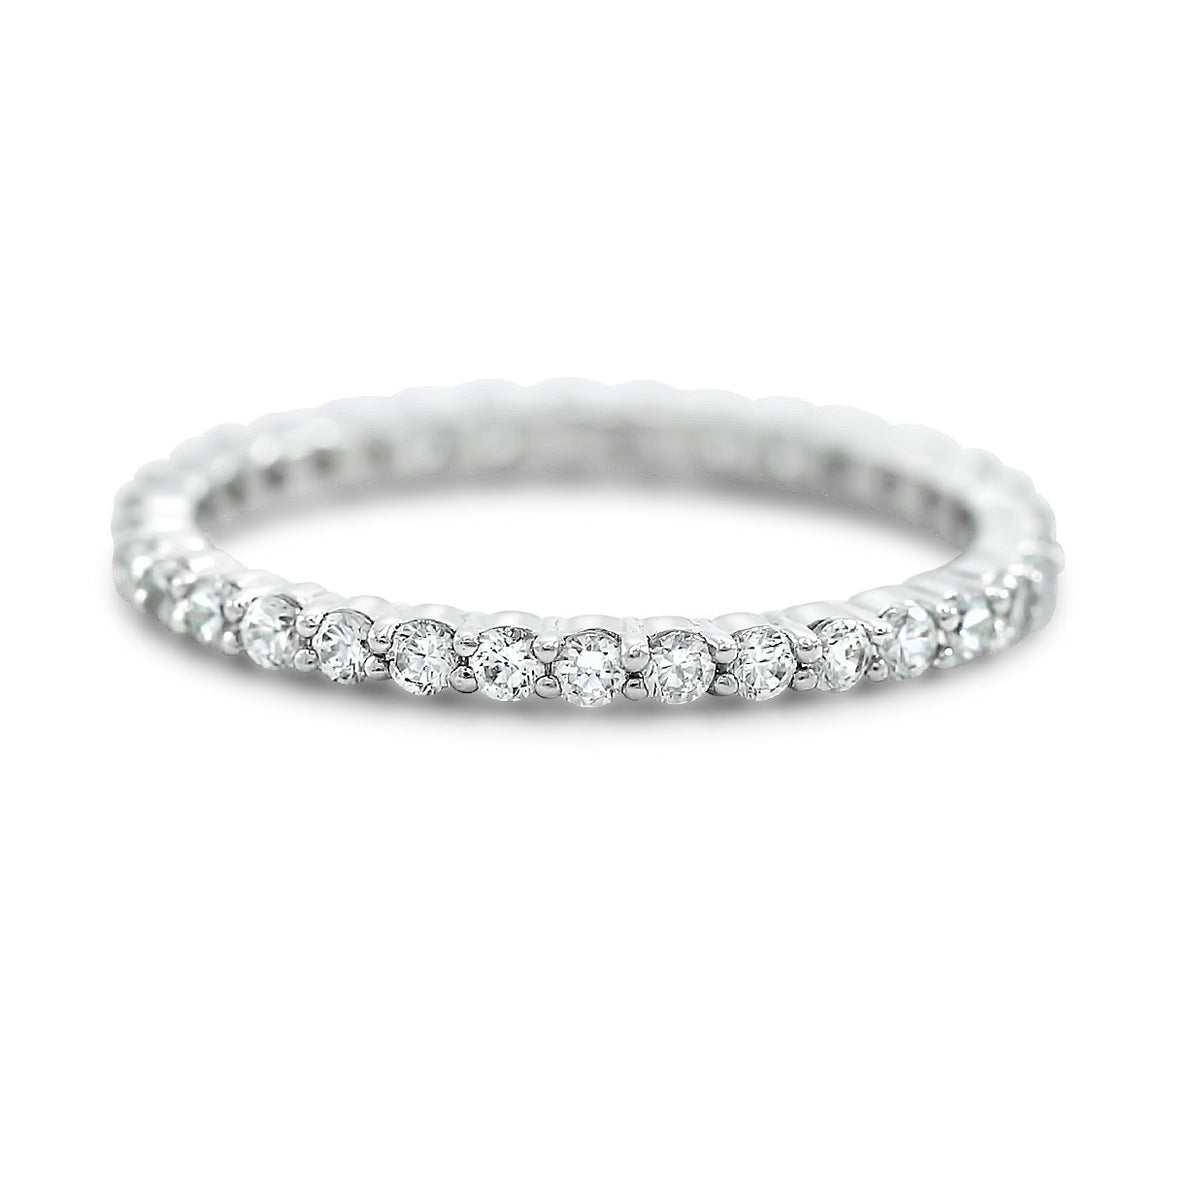 ~0.64tcw diamond eternity wedding band available in 14k yellow white and rose gold or platinum